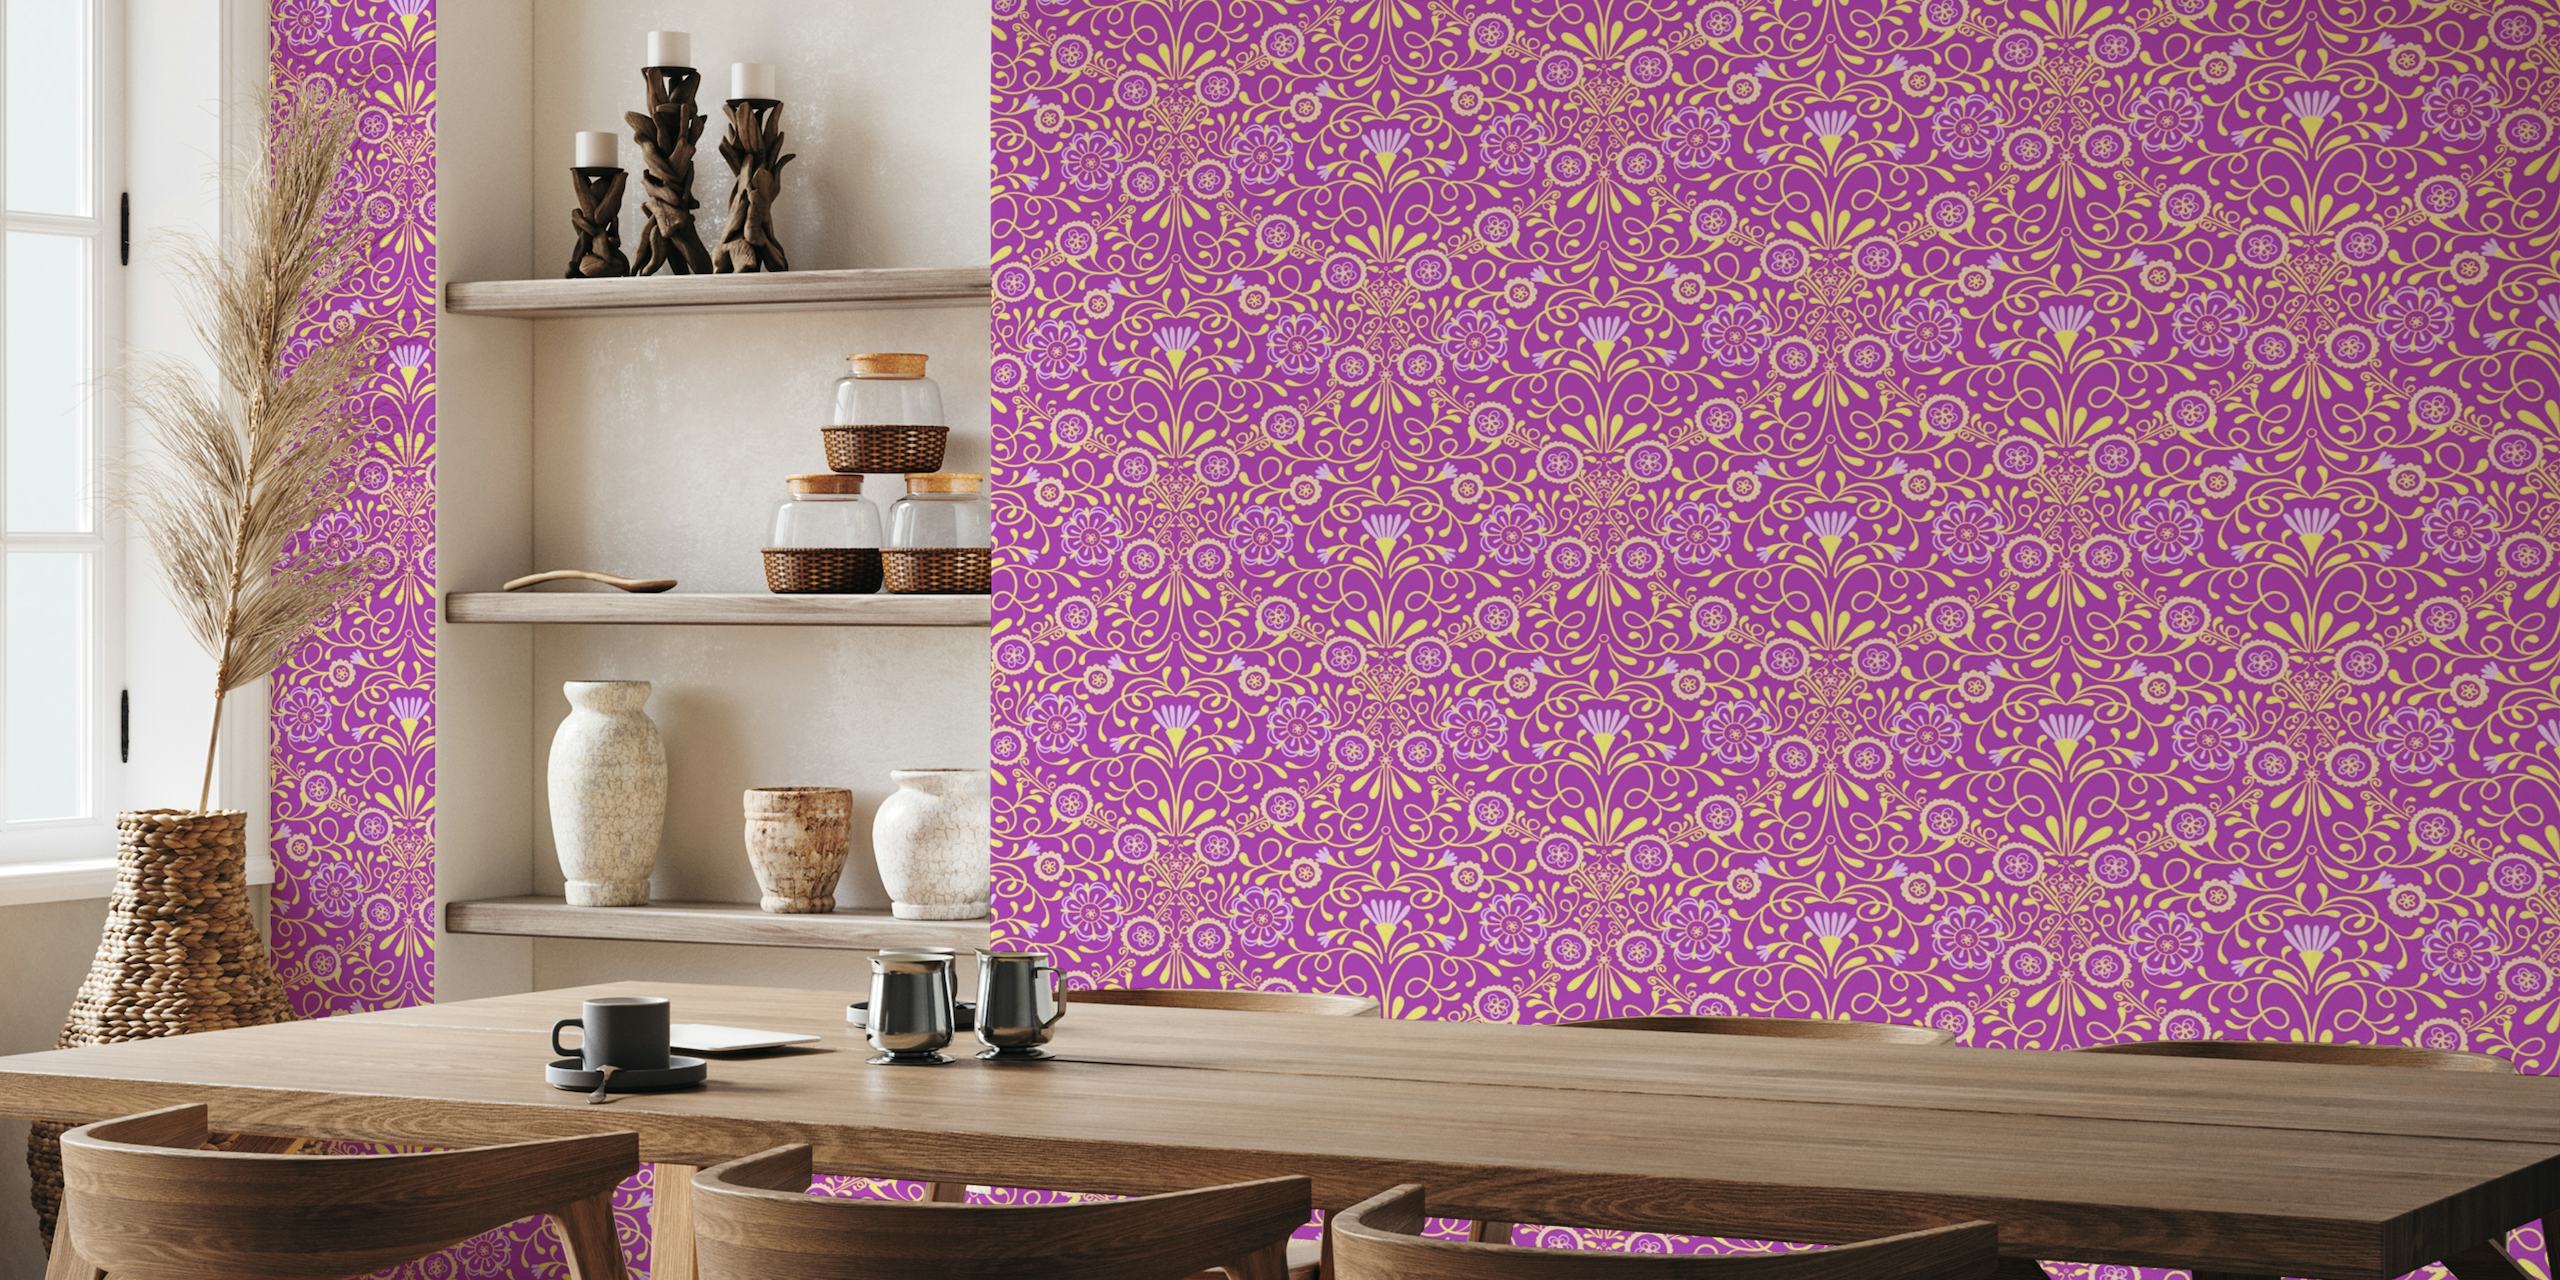 Tuscan Tile in Magenta, Yellow, and Purple papiers peint